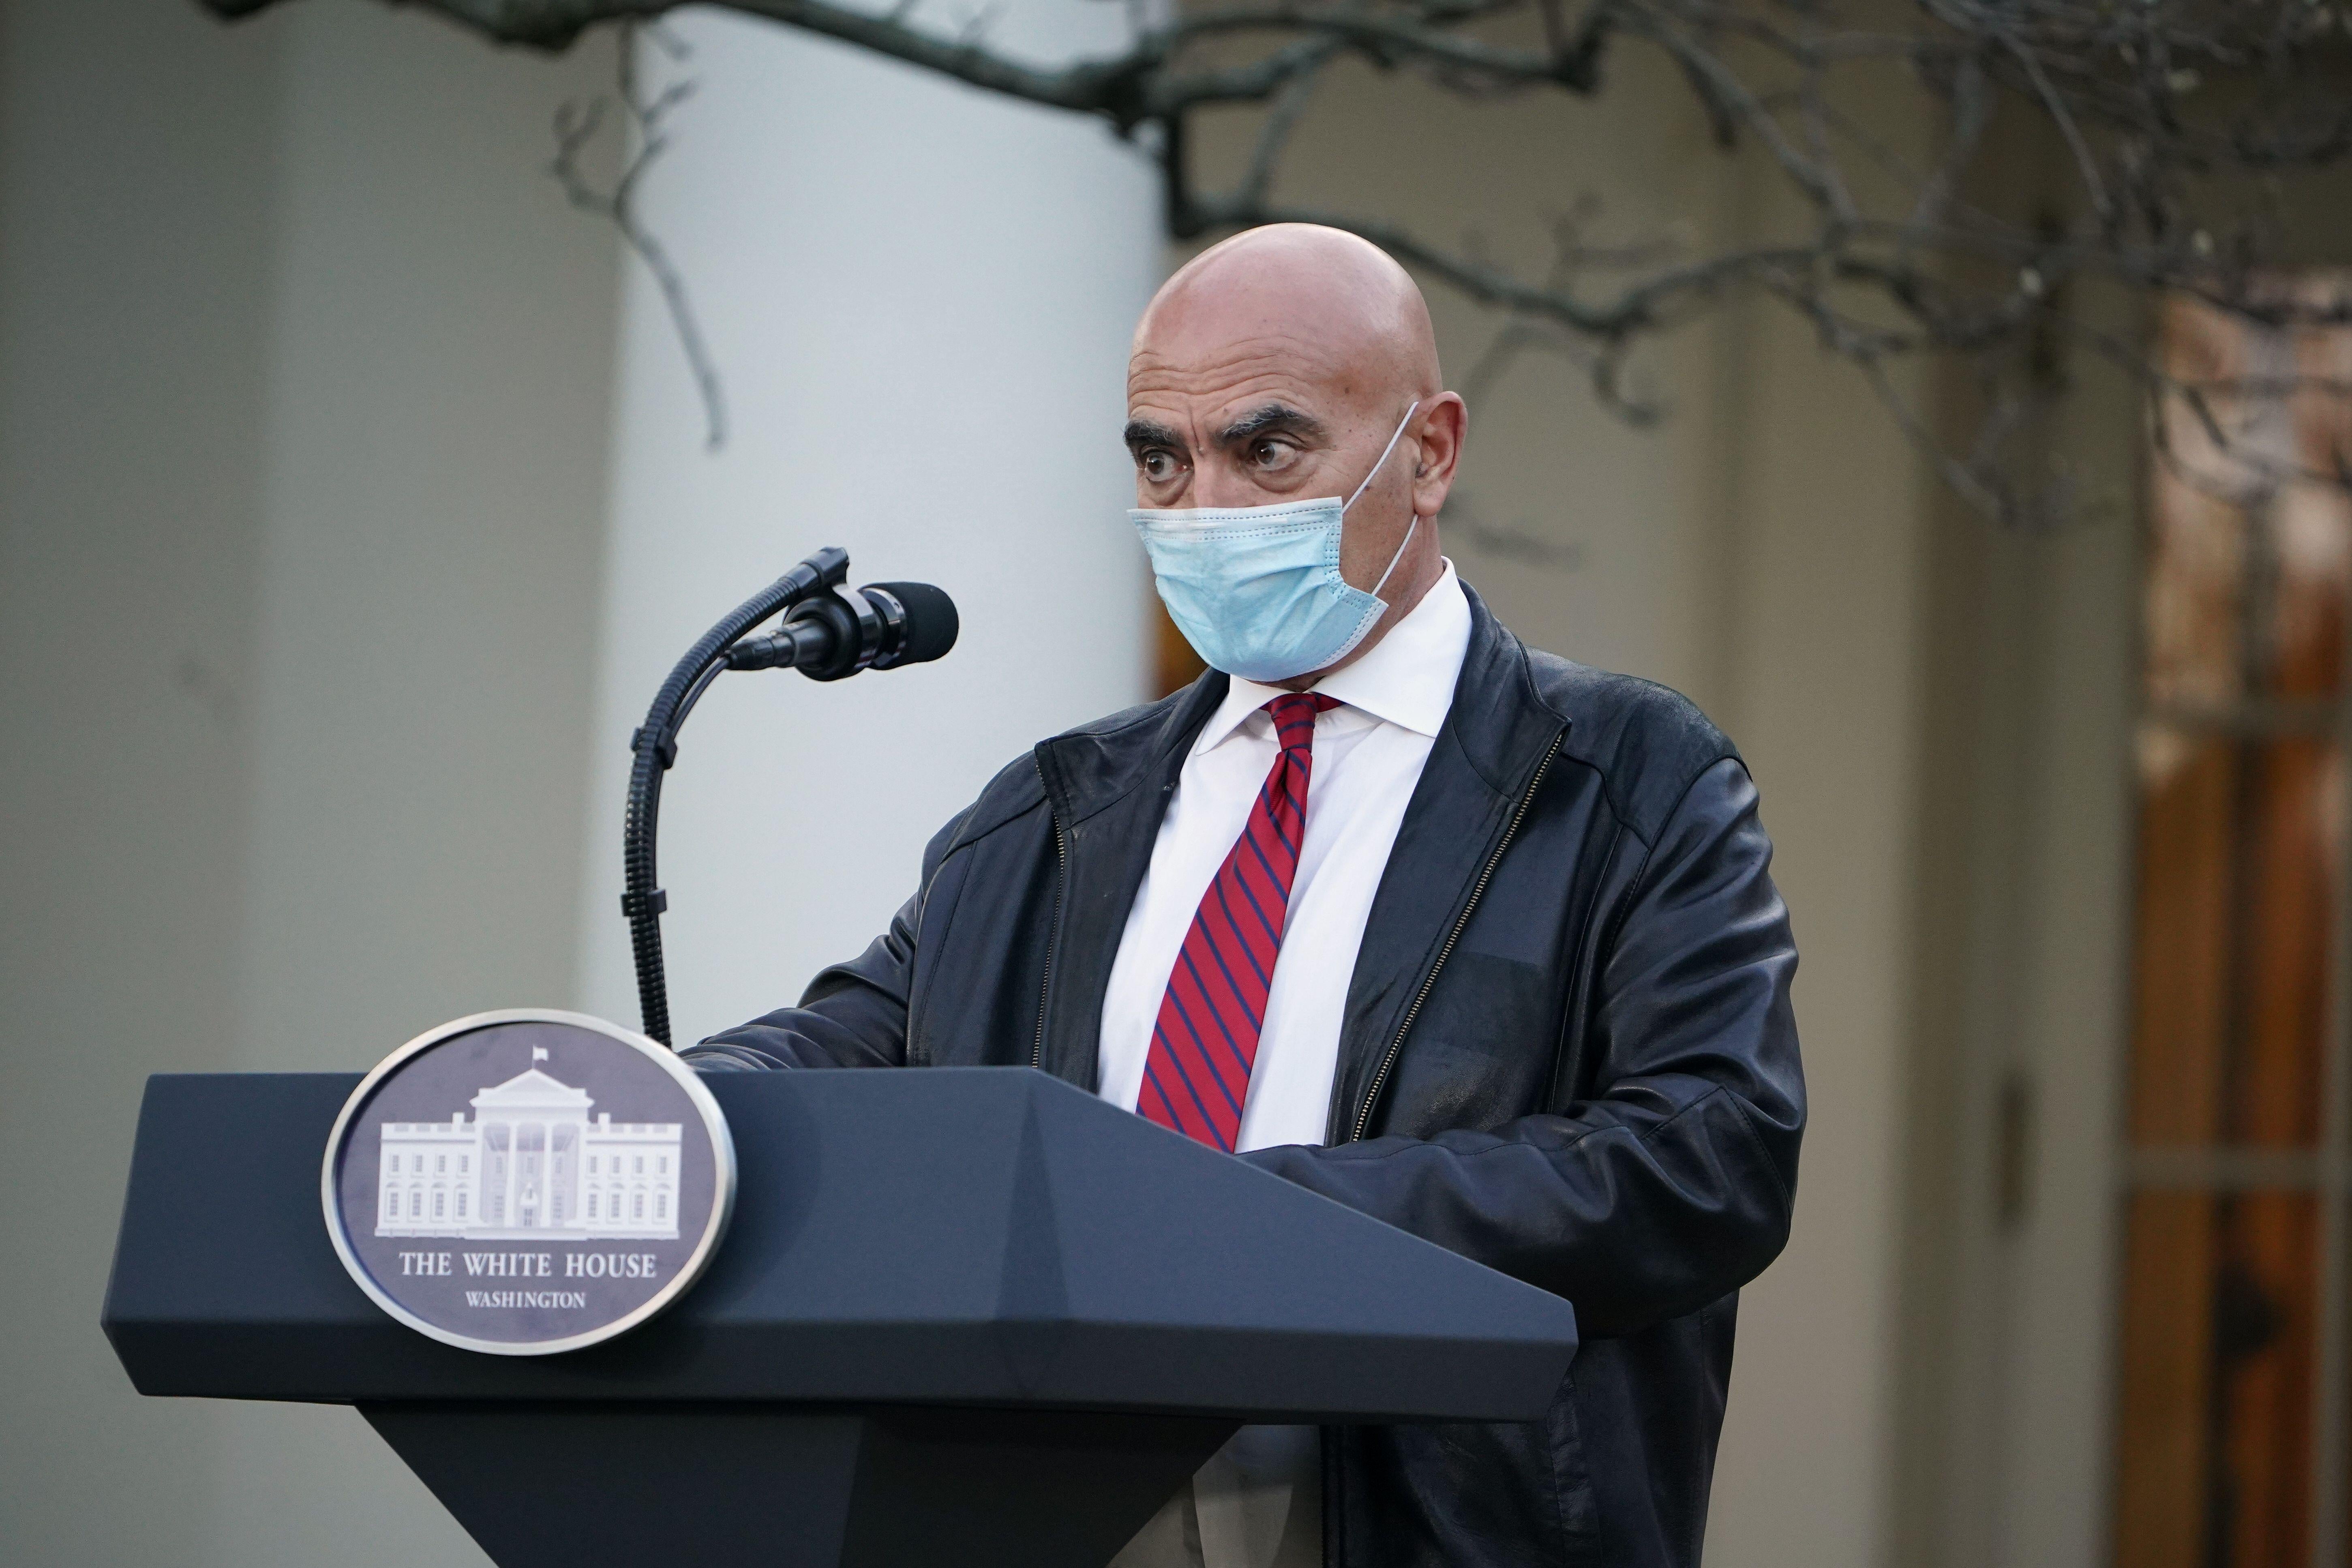 Dr. Moncef Slaoui, vaccine expert, delivers an update on "Operation Warp Speed" in the Rose Garden of the White House in Washington, D.C. on November 13, 2020. 